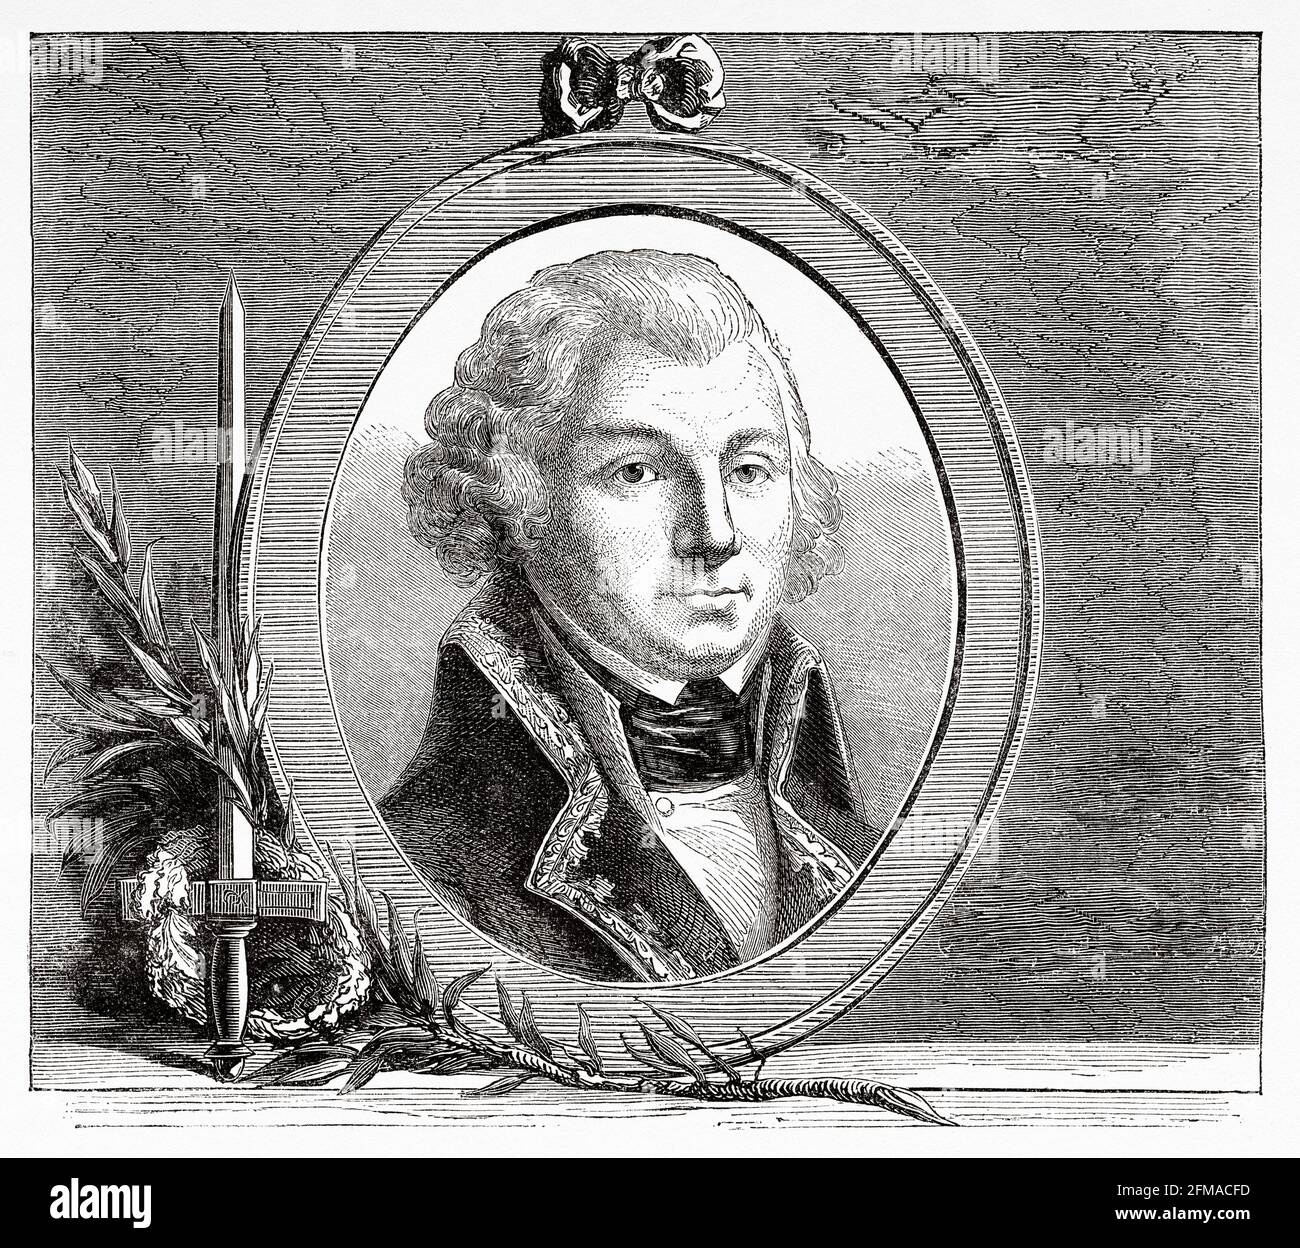 Portrait of Jean-Baptiste Jourdan (1762-1833) 1st Count Jourdan, was a  French military commander. Marshal of the Empire by Emperor Napoleon I in  1804. France. Old 19th century engraved illustration from Histoire de